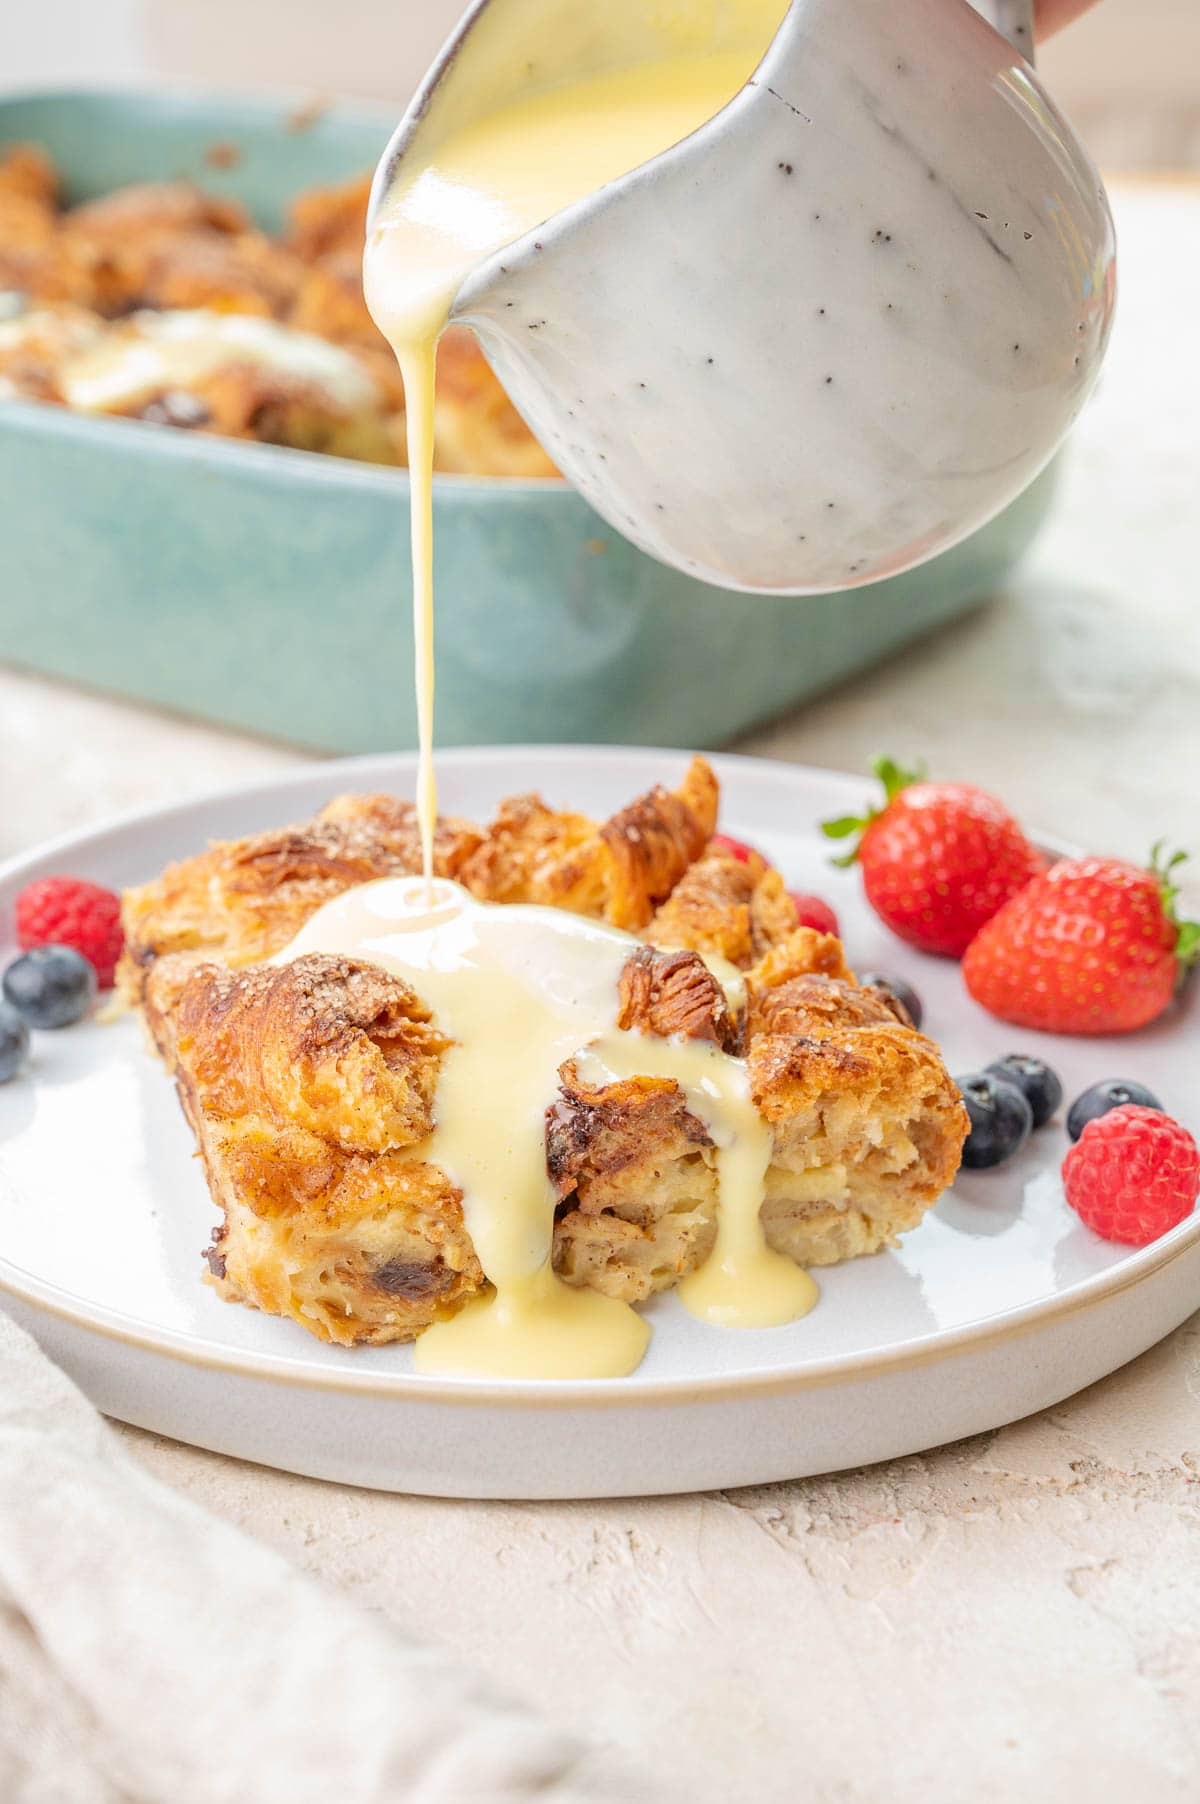 Vanilla sauce is being poured over croissant bread pudding on a white plate with berries.